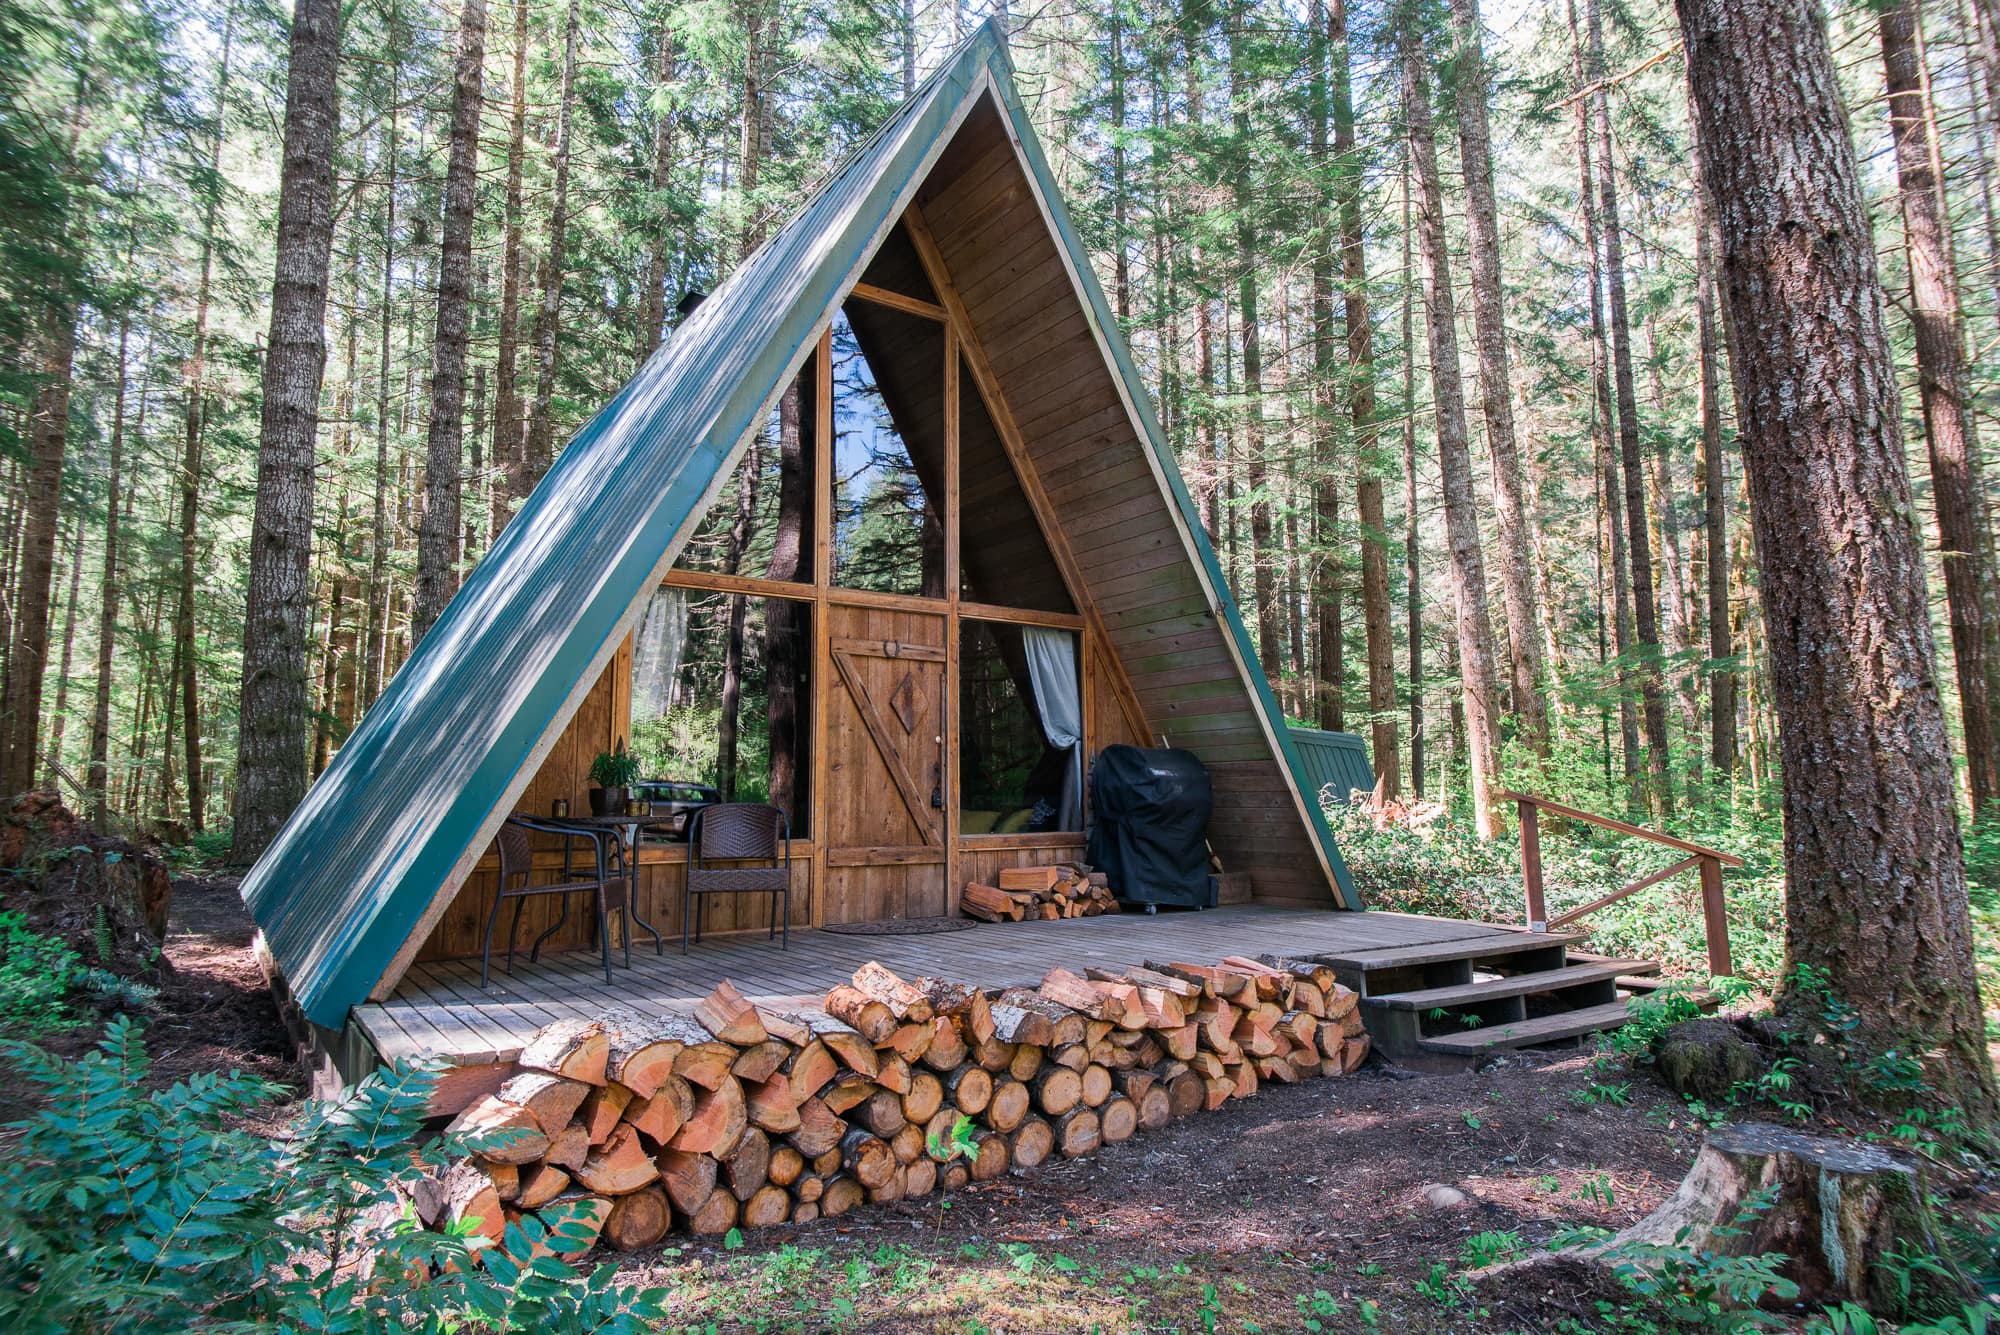 Get cozy in these A-frame homes